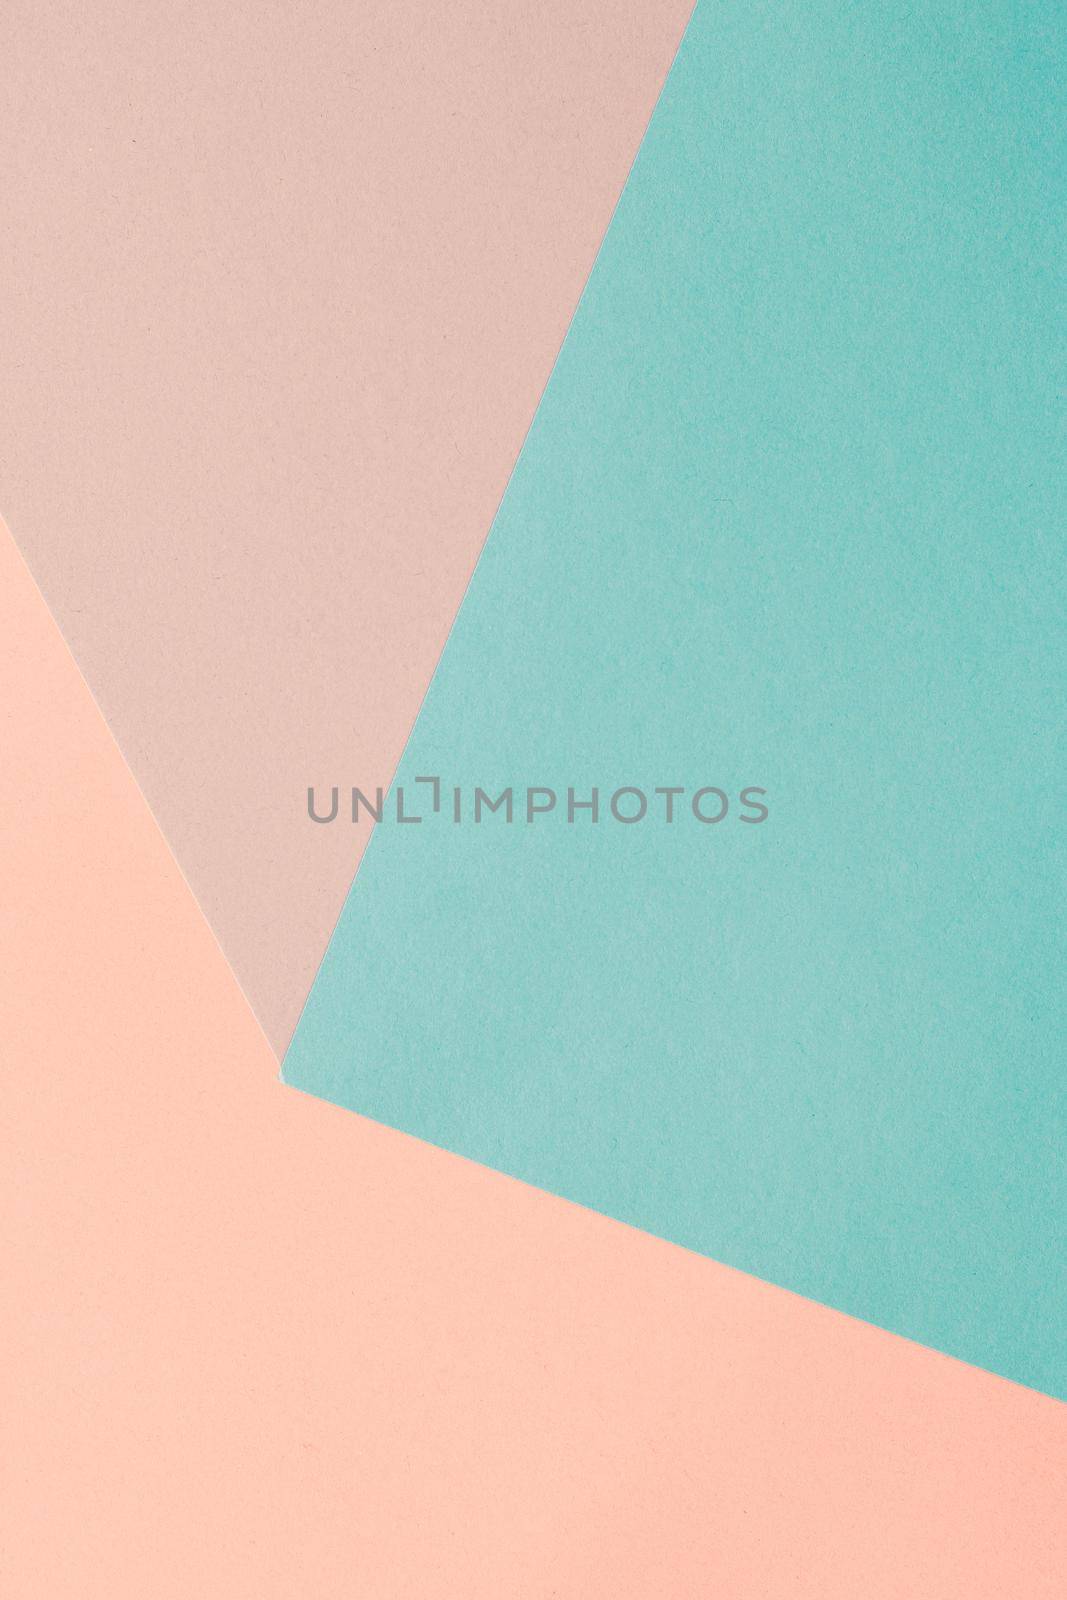 Brand identity, graphic design and business card set concept - Blank paper textured background, stationery mockup